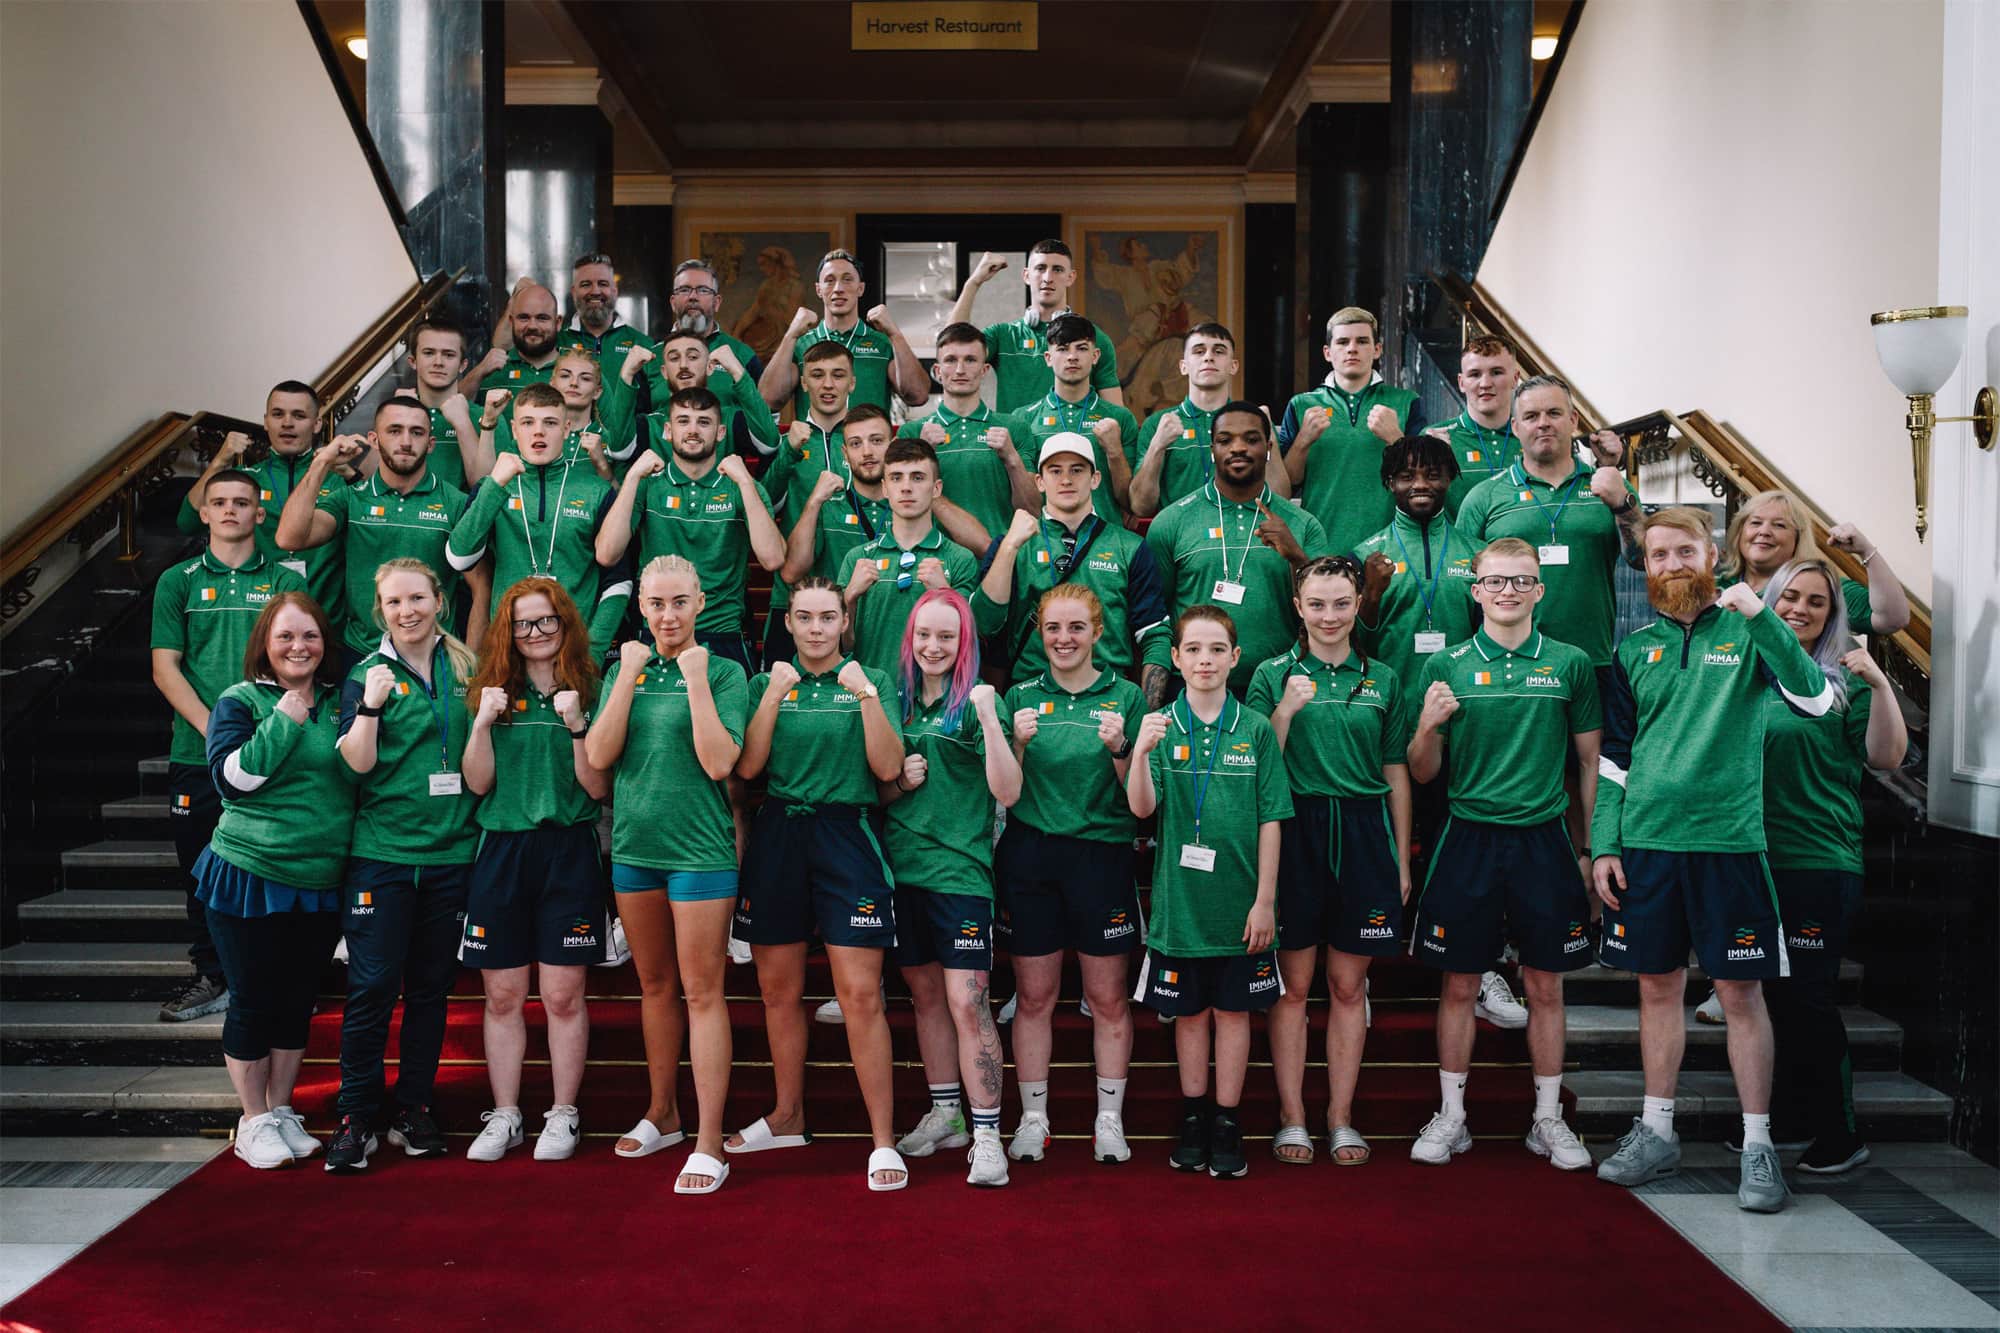 Ireland aims to repeat Prague success by selecting strong team for the World Championships